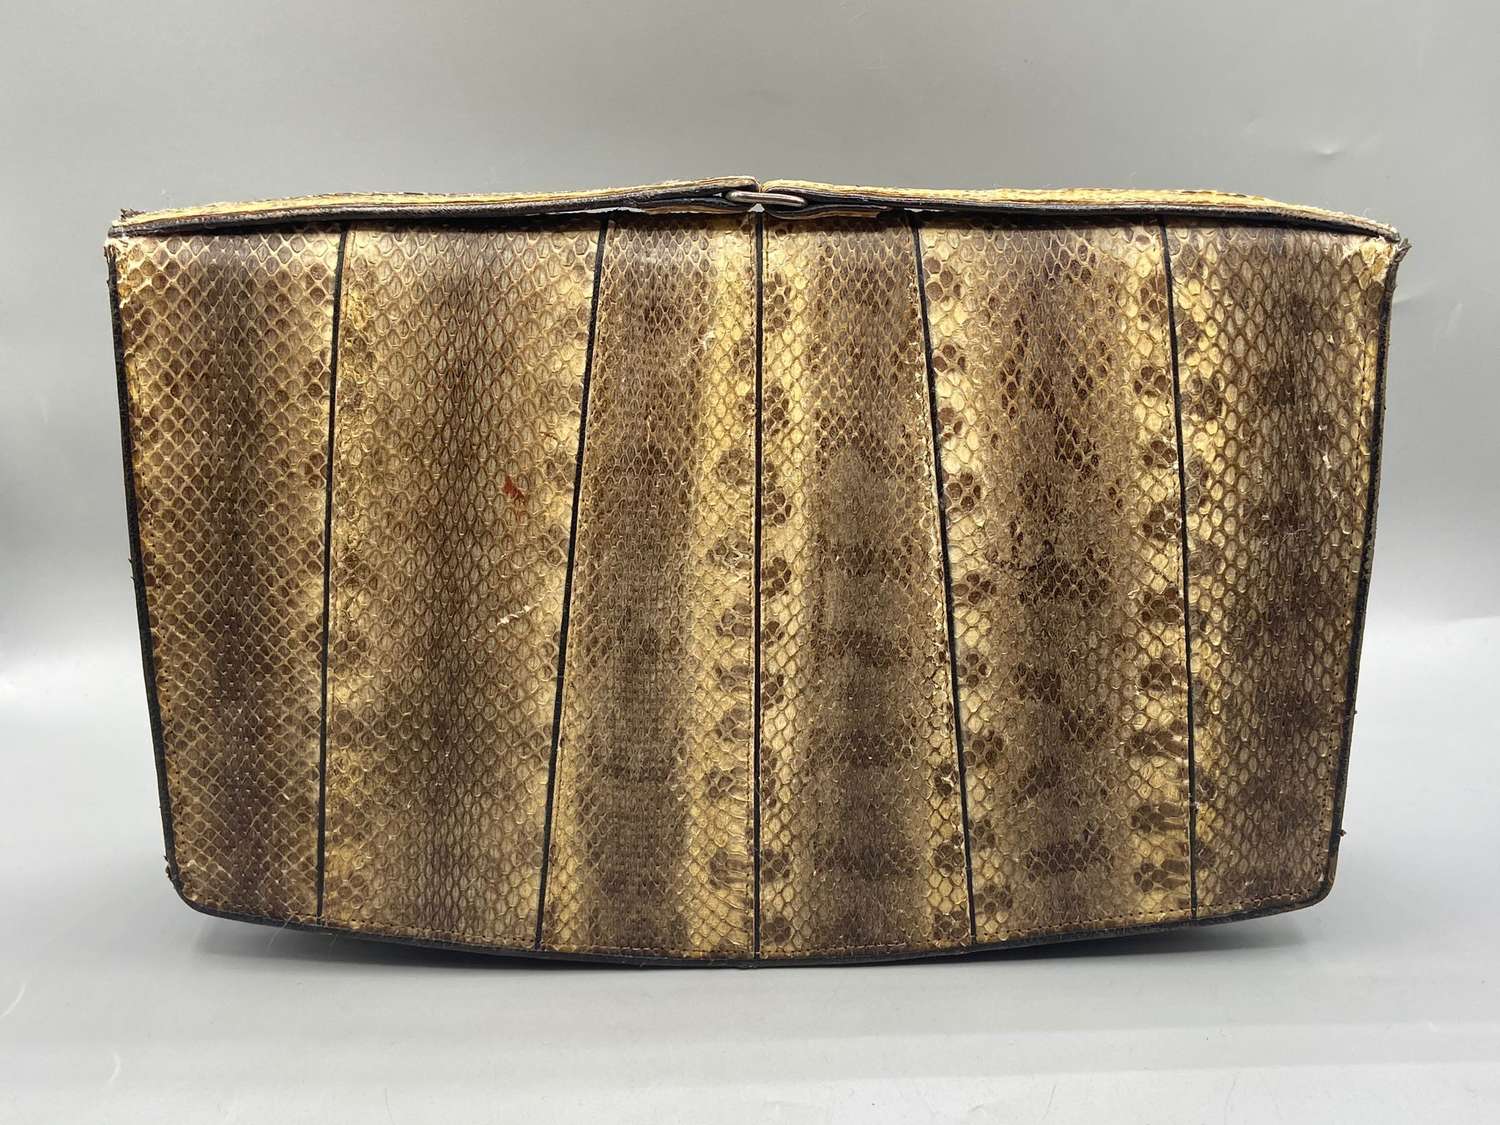 Vintage 1920s Snake Leather Skin Hand Clutch Bag & Brown Leather Purse